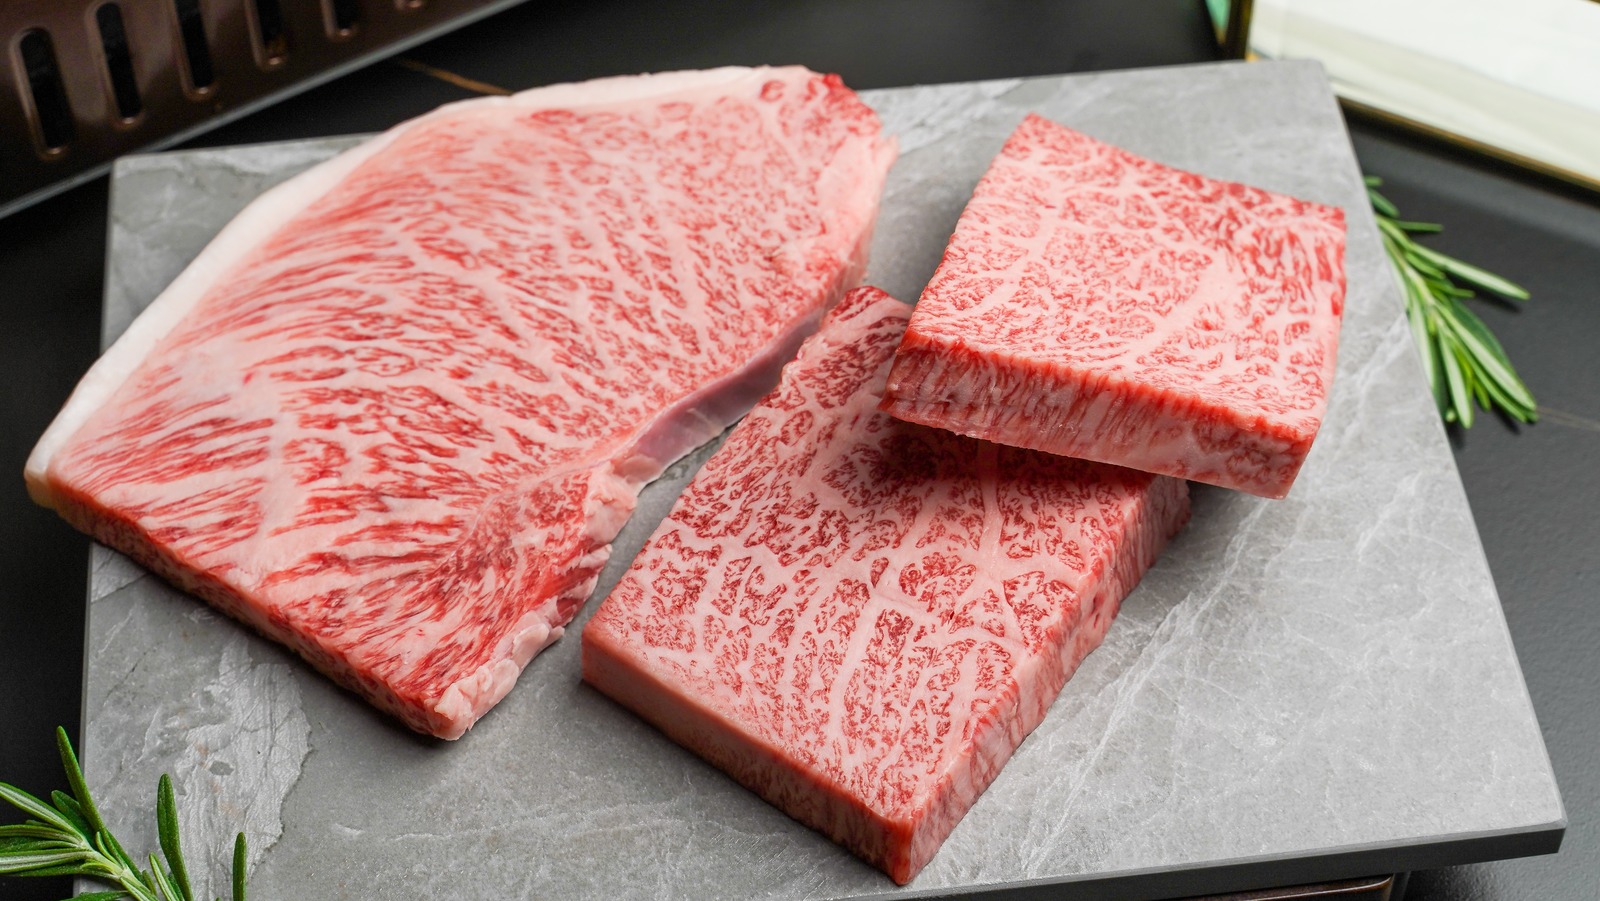 https://www.tastingtable.com/img/gallery/why-is-wagyu-beef-so-expensive-and-is-it-worth-the-price/l-intro-1660577523.jpg